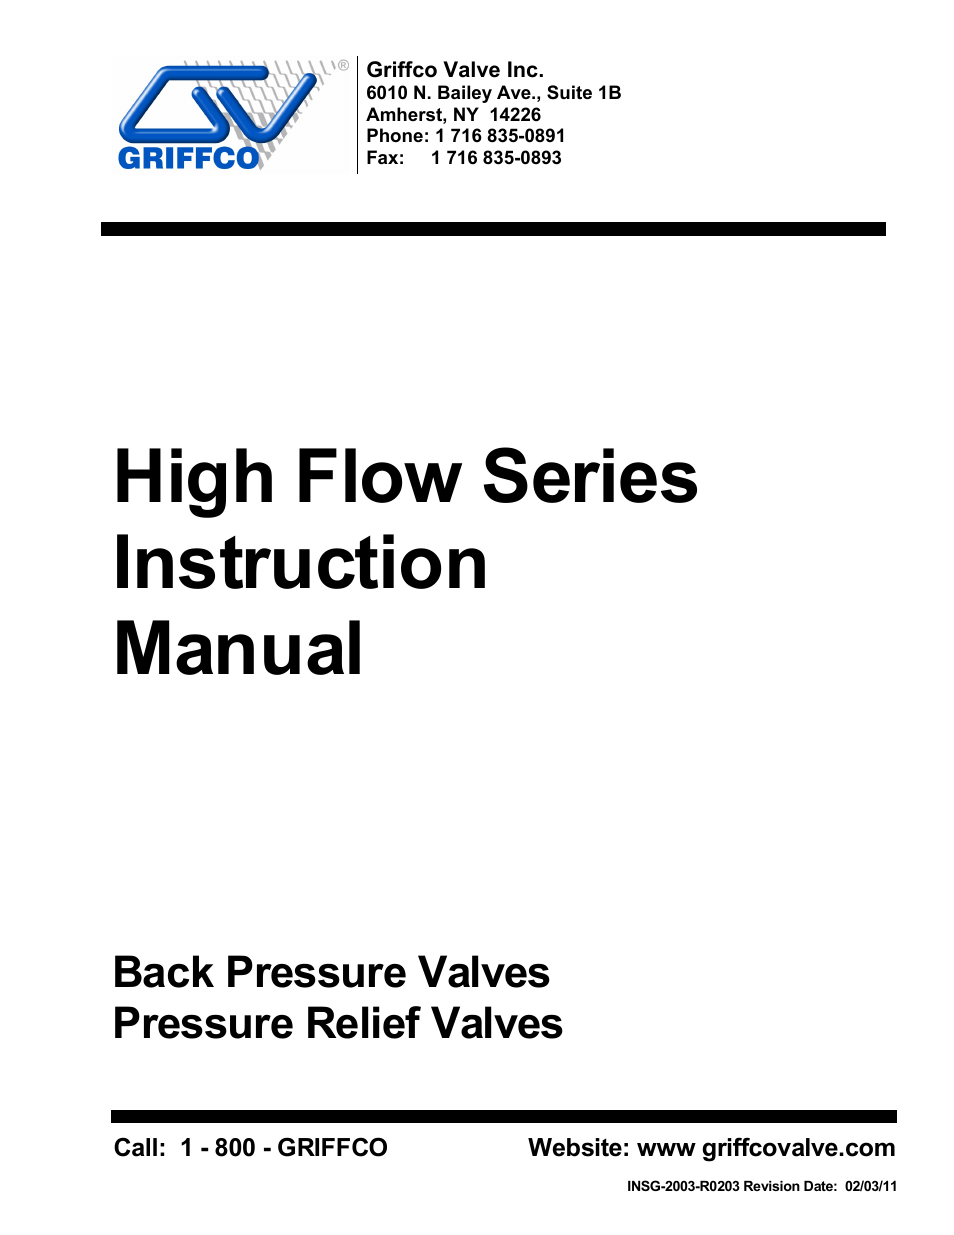 High-Flow Series (Page 1)